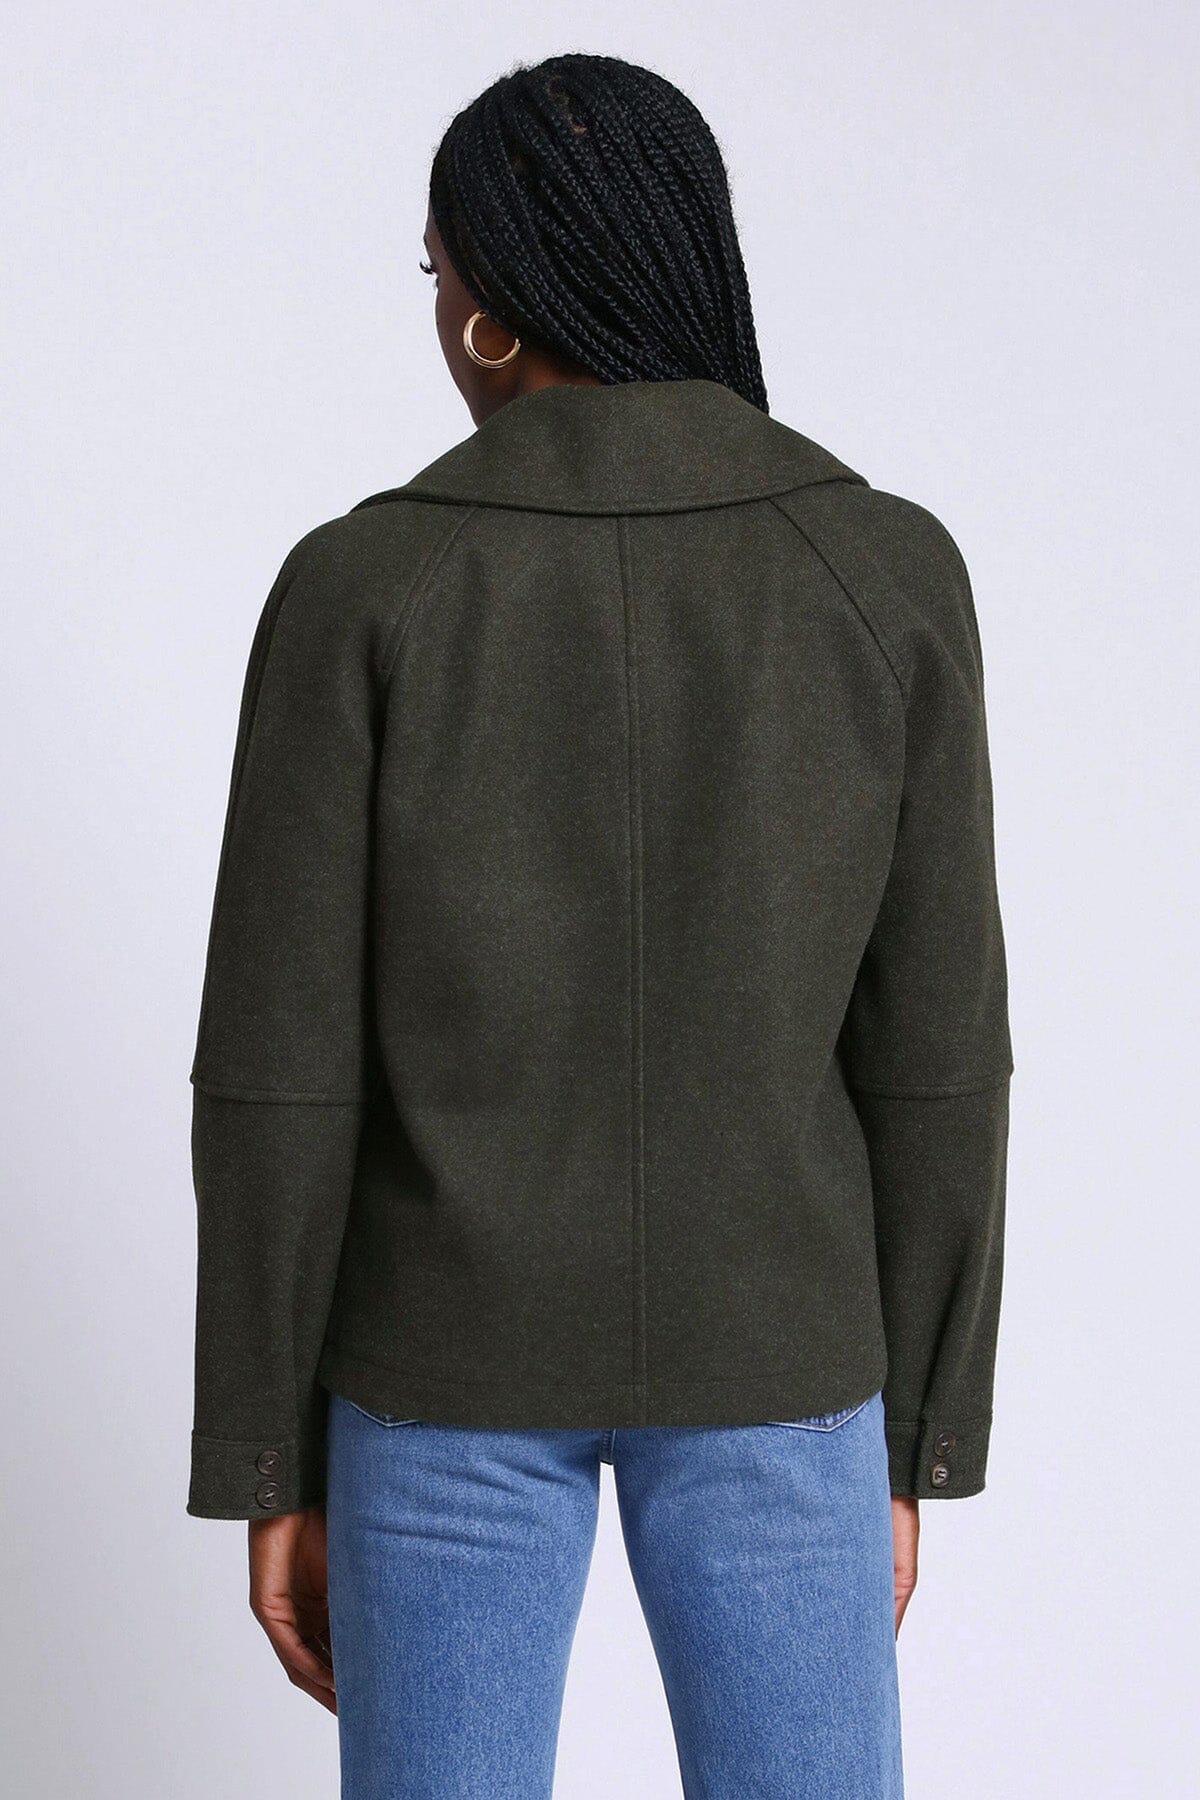 relaxed full zip front jacket shacket olive green - figure flattering date night coats jackets shackets outerwear for women